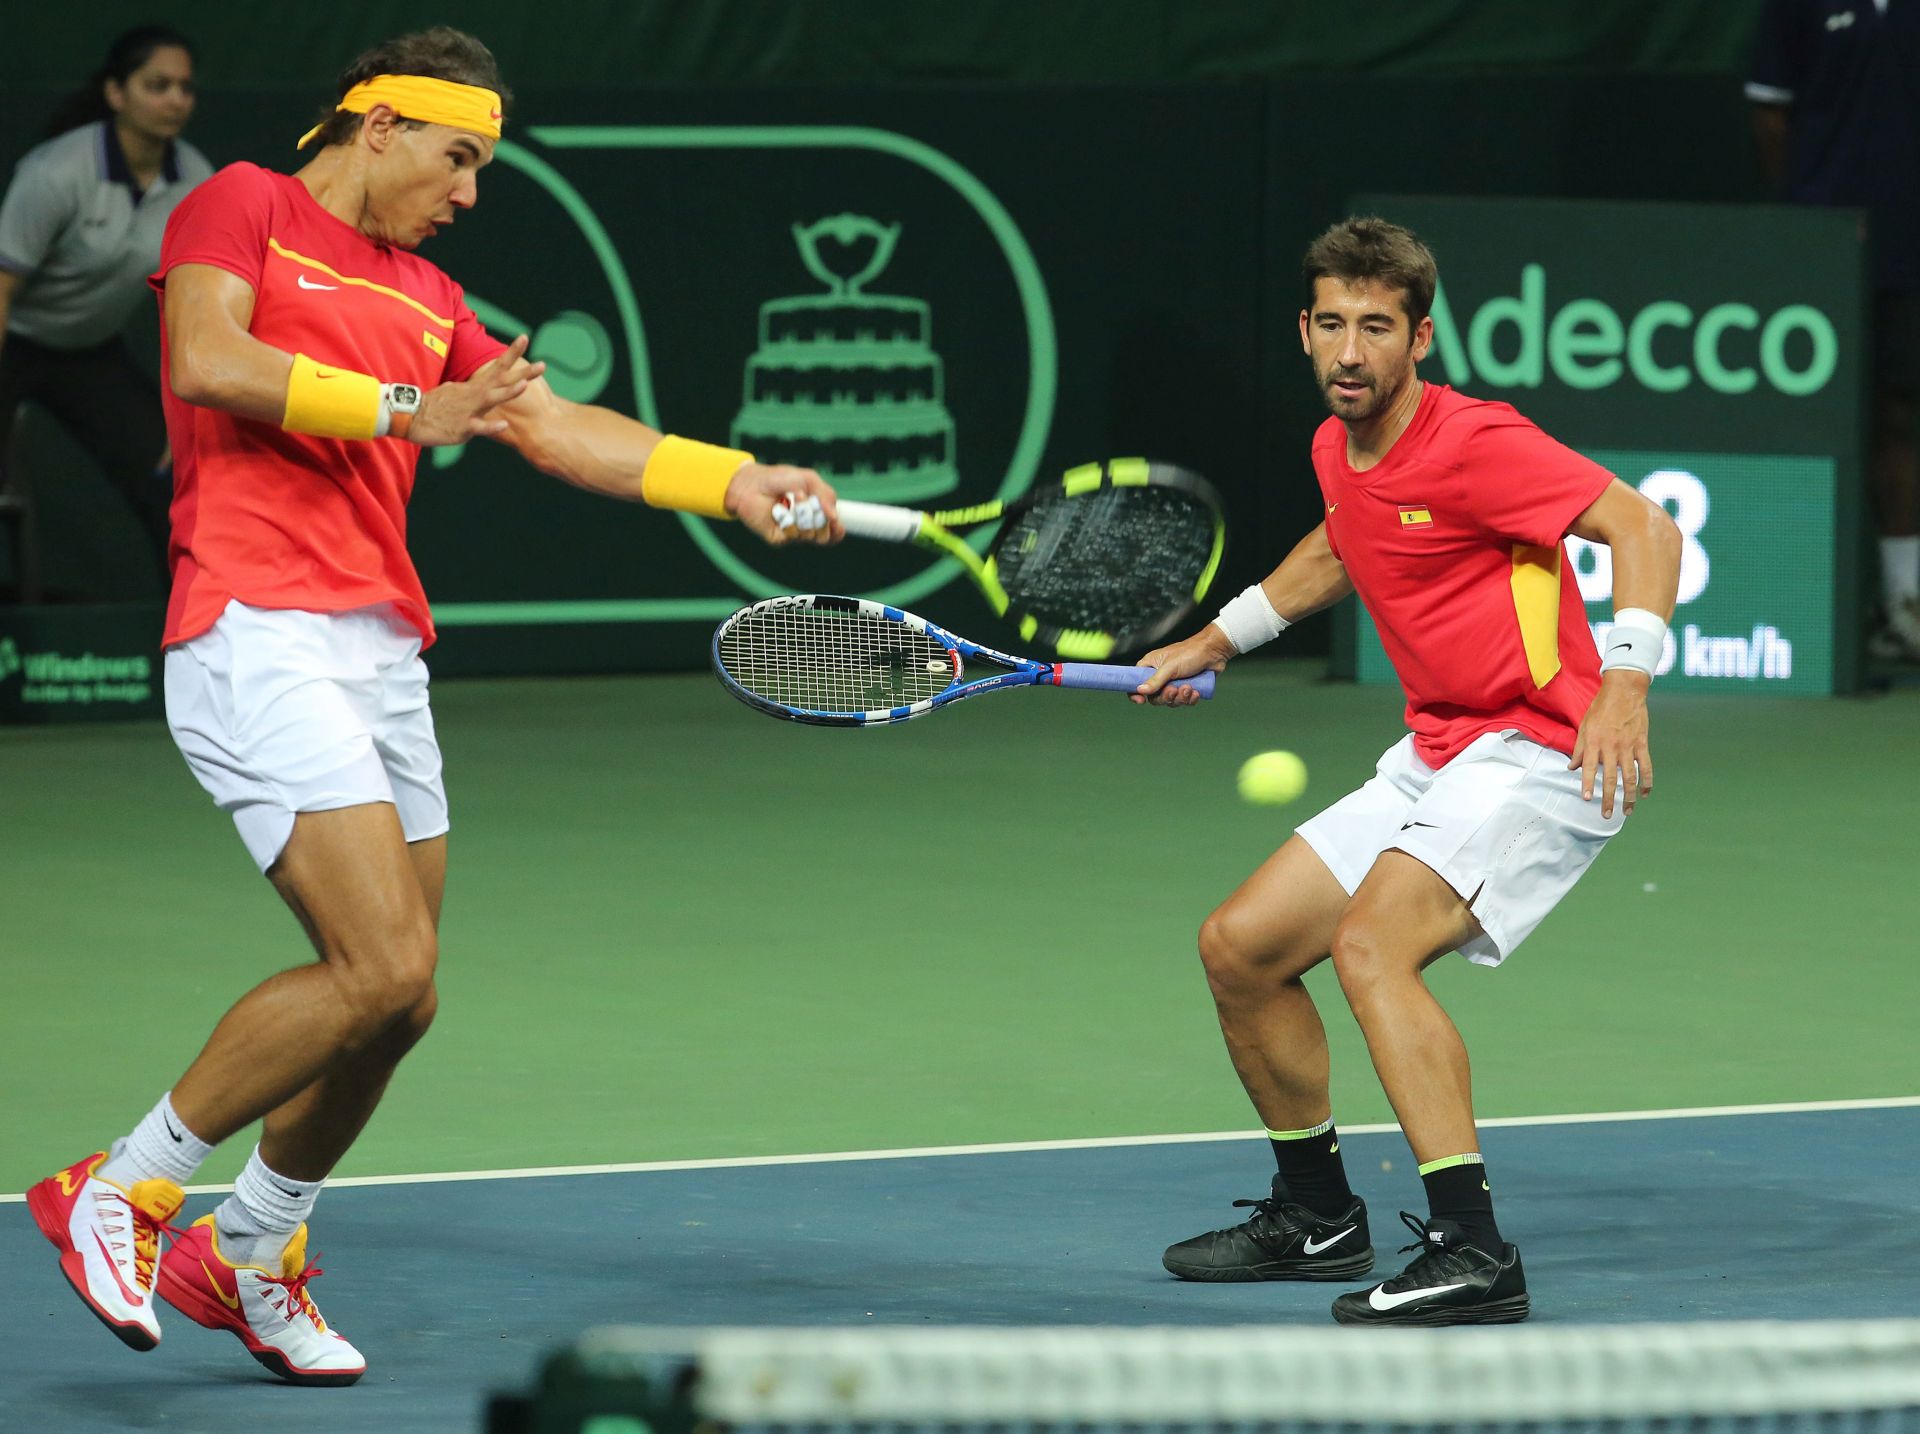 epa05544485 Spain's Marc Lopez (R) and Rafael Nadal in action against India's Saketh Myneni and Leander Paes during the doubles match for the Tennis Davis Cup World Group Play-Off tie between Spain and India, in New Delhi, India, 17 September 2016.  EPA/RAJAT GUPTA